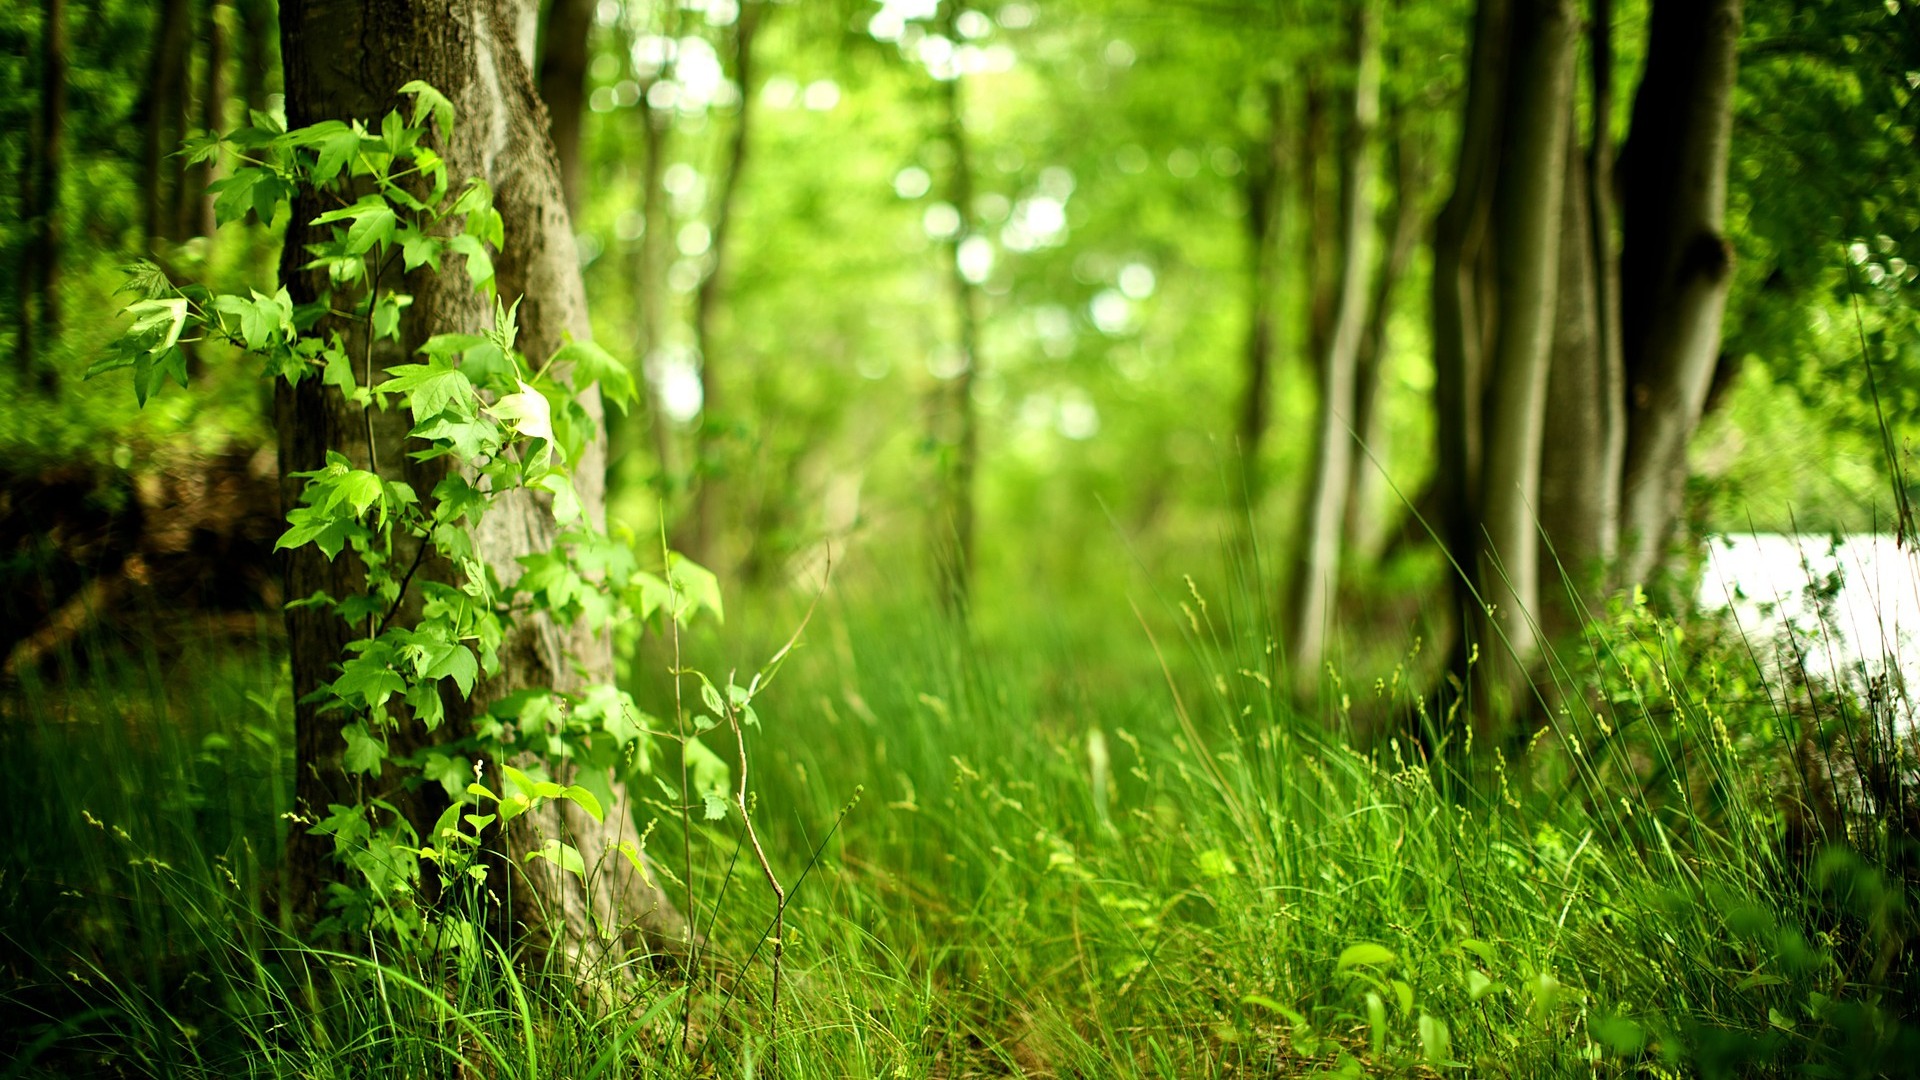 Green Woods Nature Photography Wallpaper